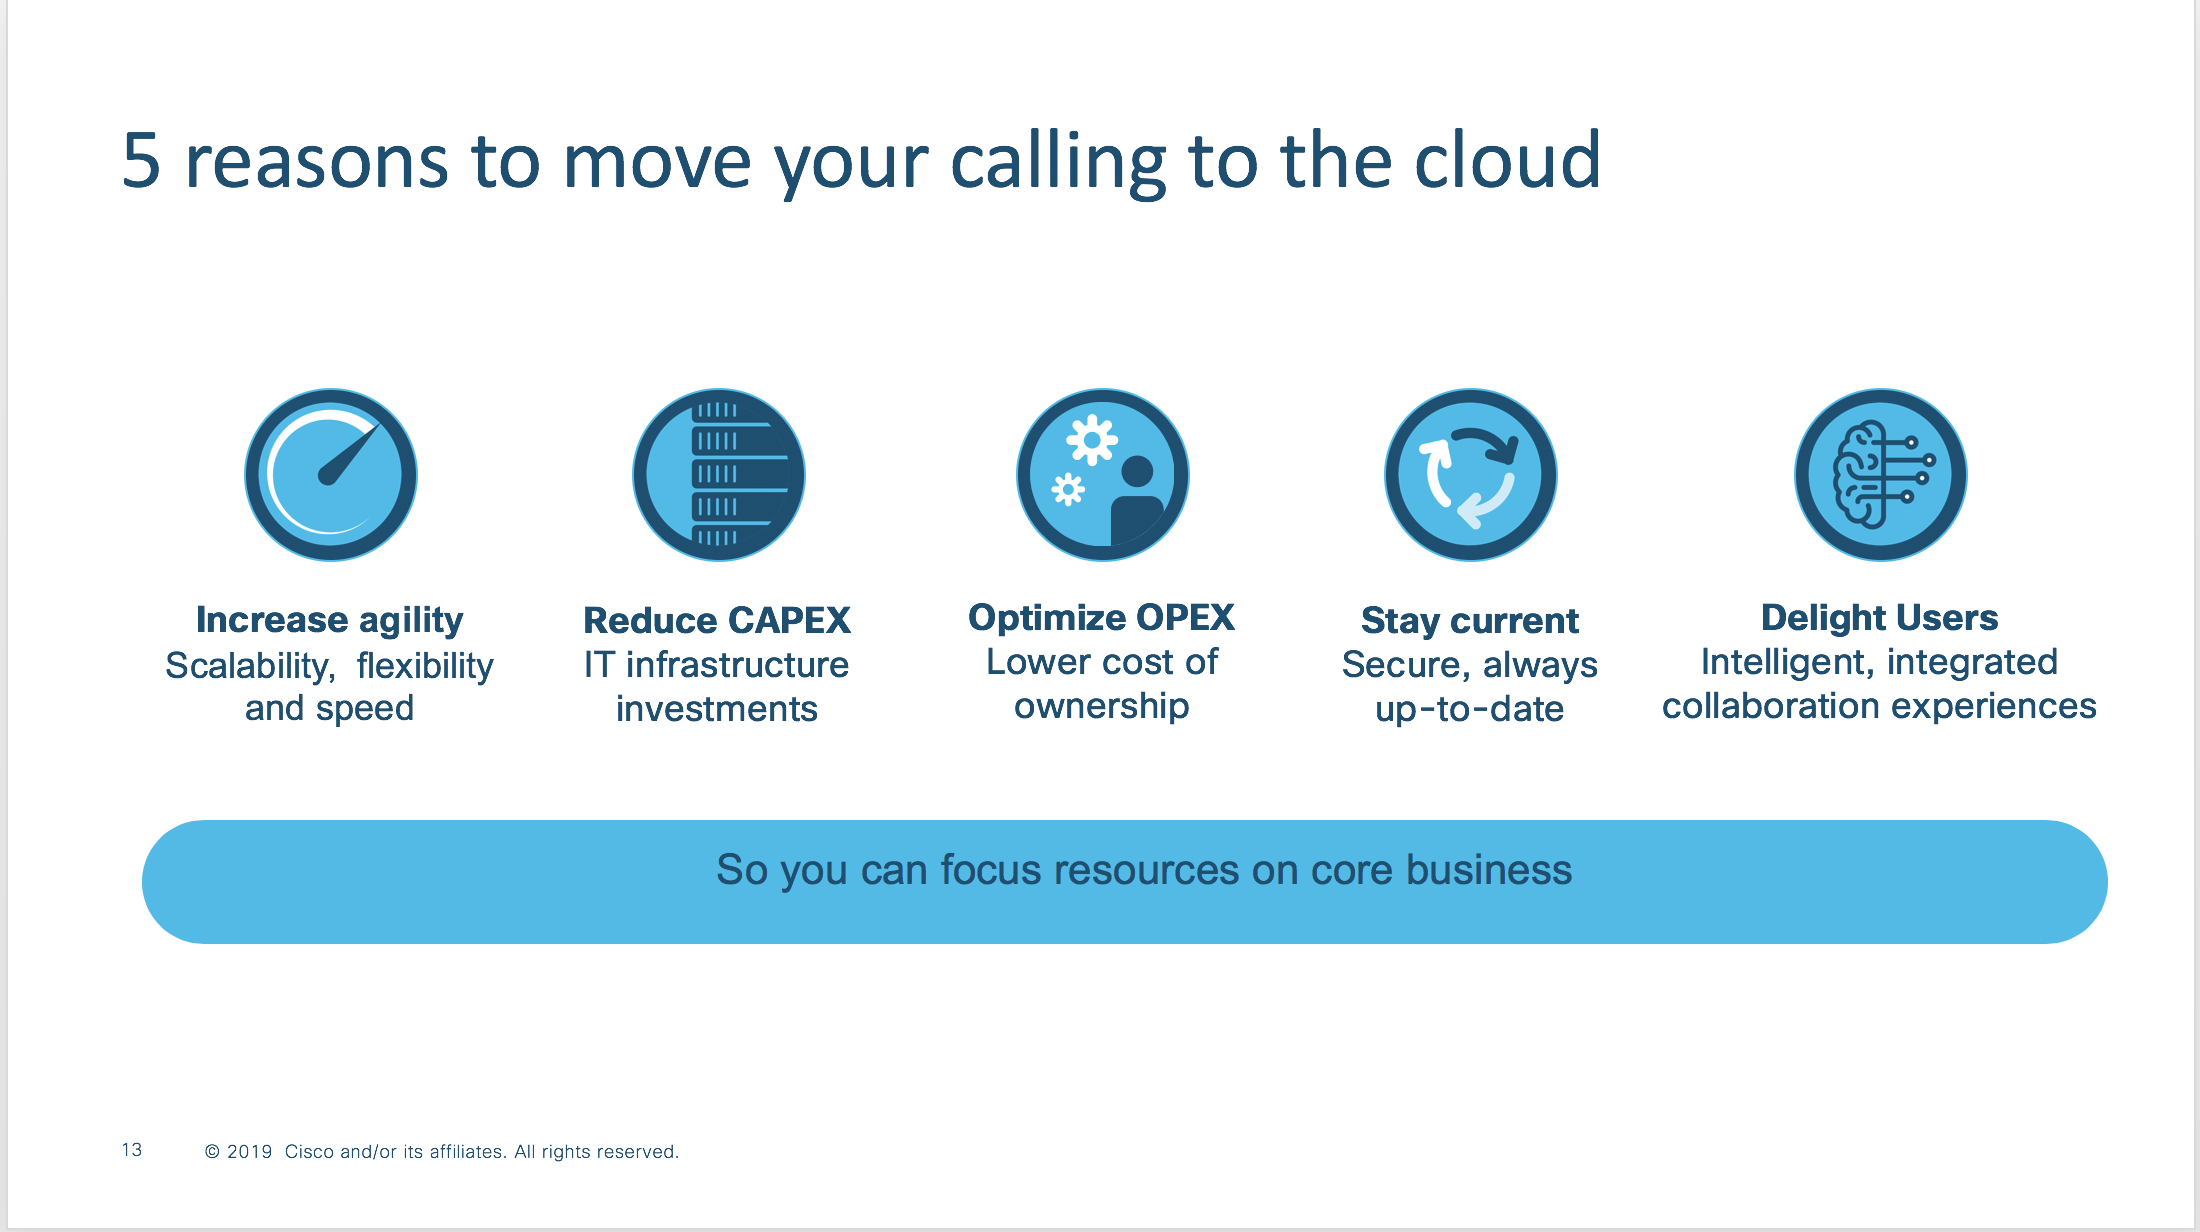 5 Reasons to Move Your Calling to the Cloud